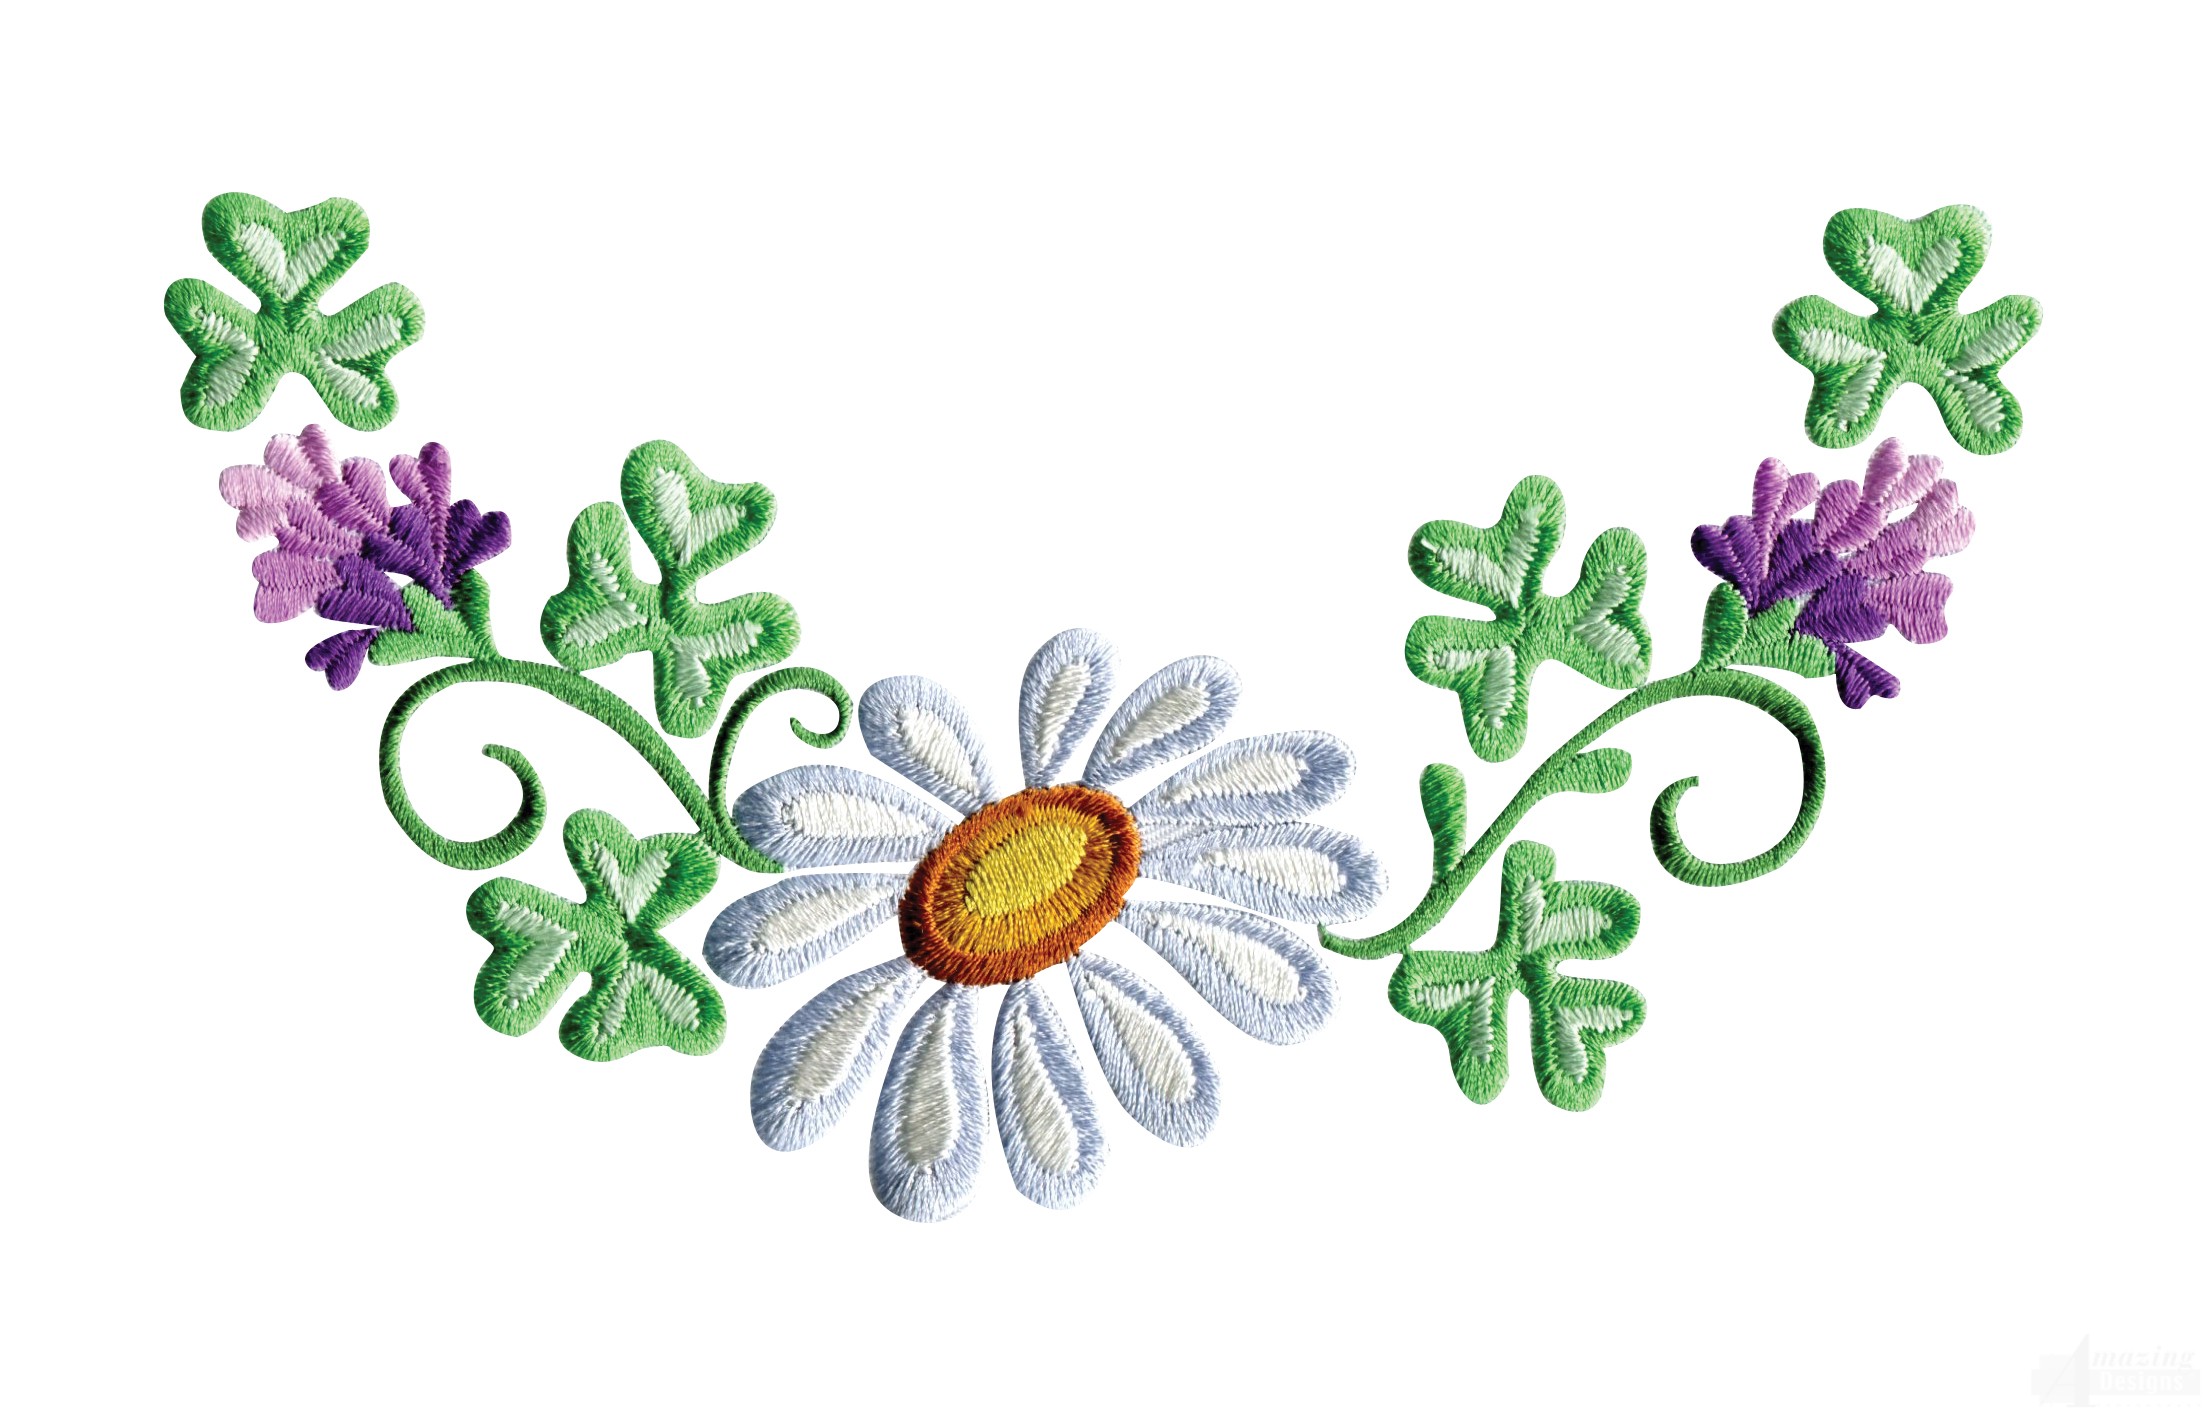 Daisy Floral Border 1 Embroidery Design - ClipArt Best - ClipArt Best